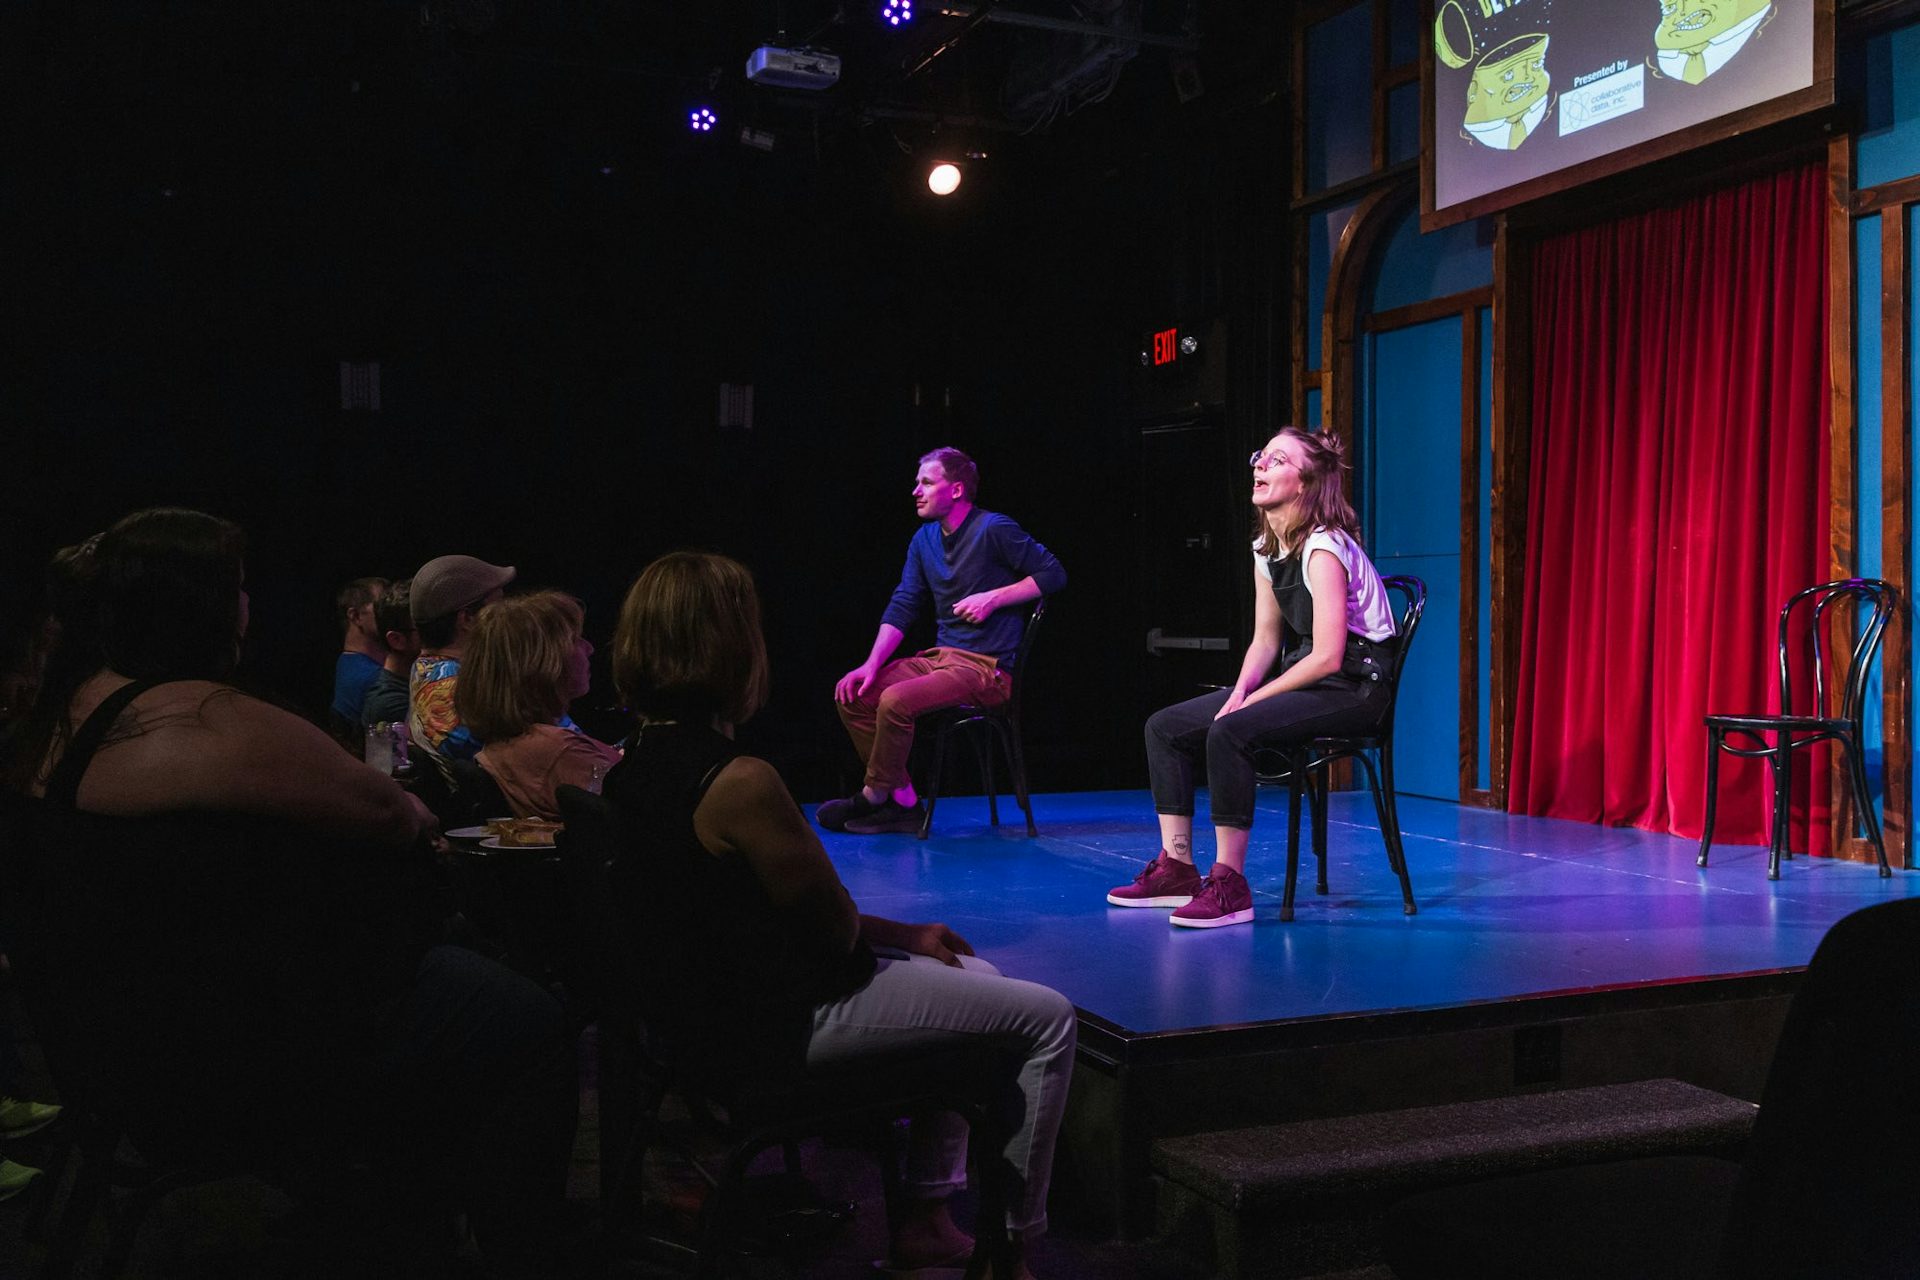 Jerome & Alex are on stage sitting on chairs in front of a crowd with a red curtain behind them. They and the chairs are pointed towards the crowd where Alex has a spotlight on them to deliver a soliloquy with Jerome off to her left.